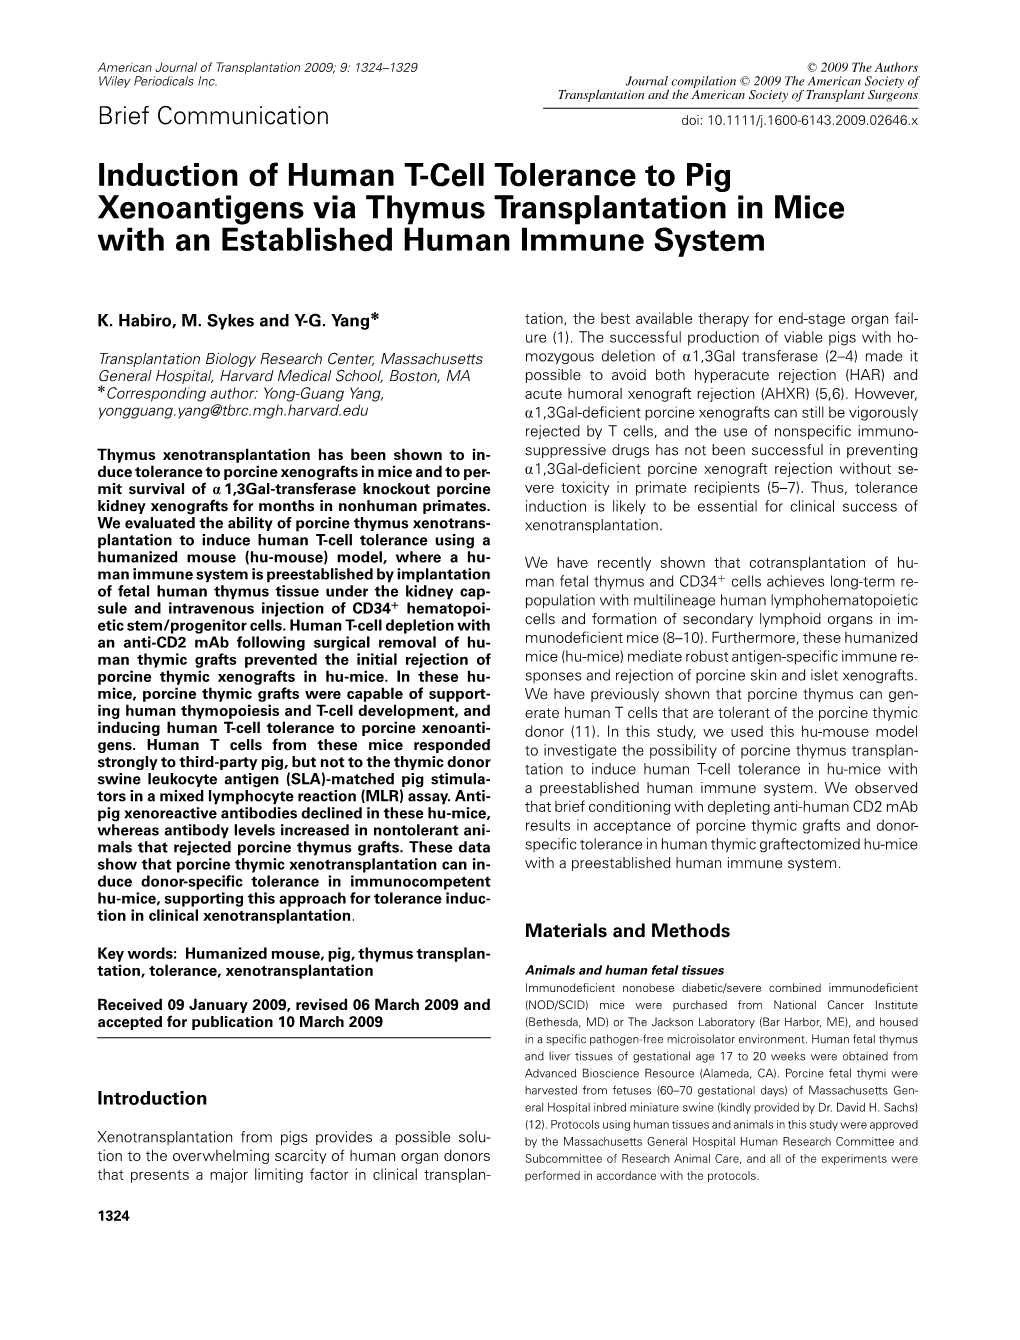 Induction of Human T‐Cell Tolerance to Pig Xenoantigens Via Thymus